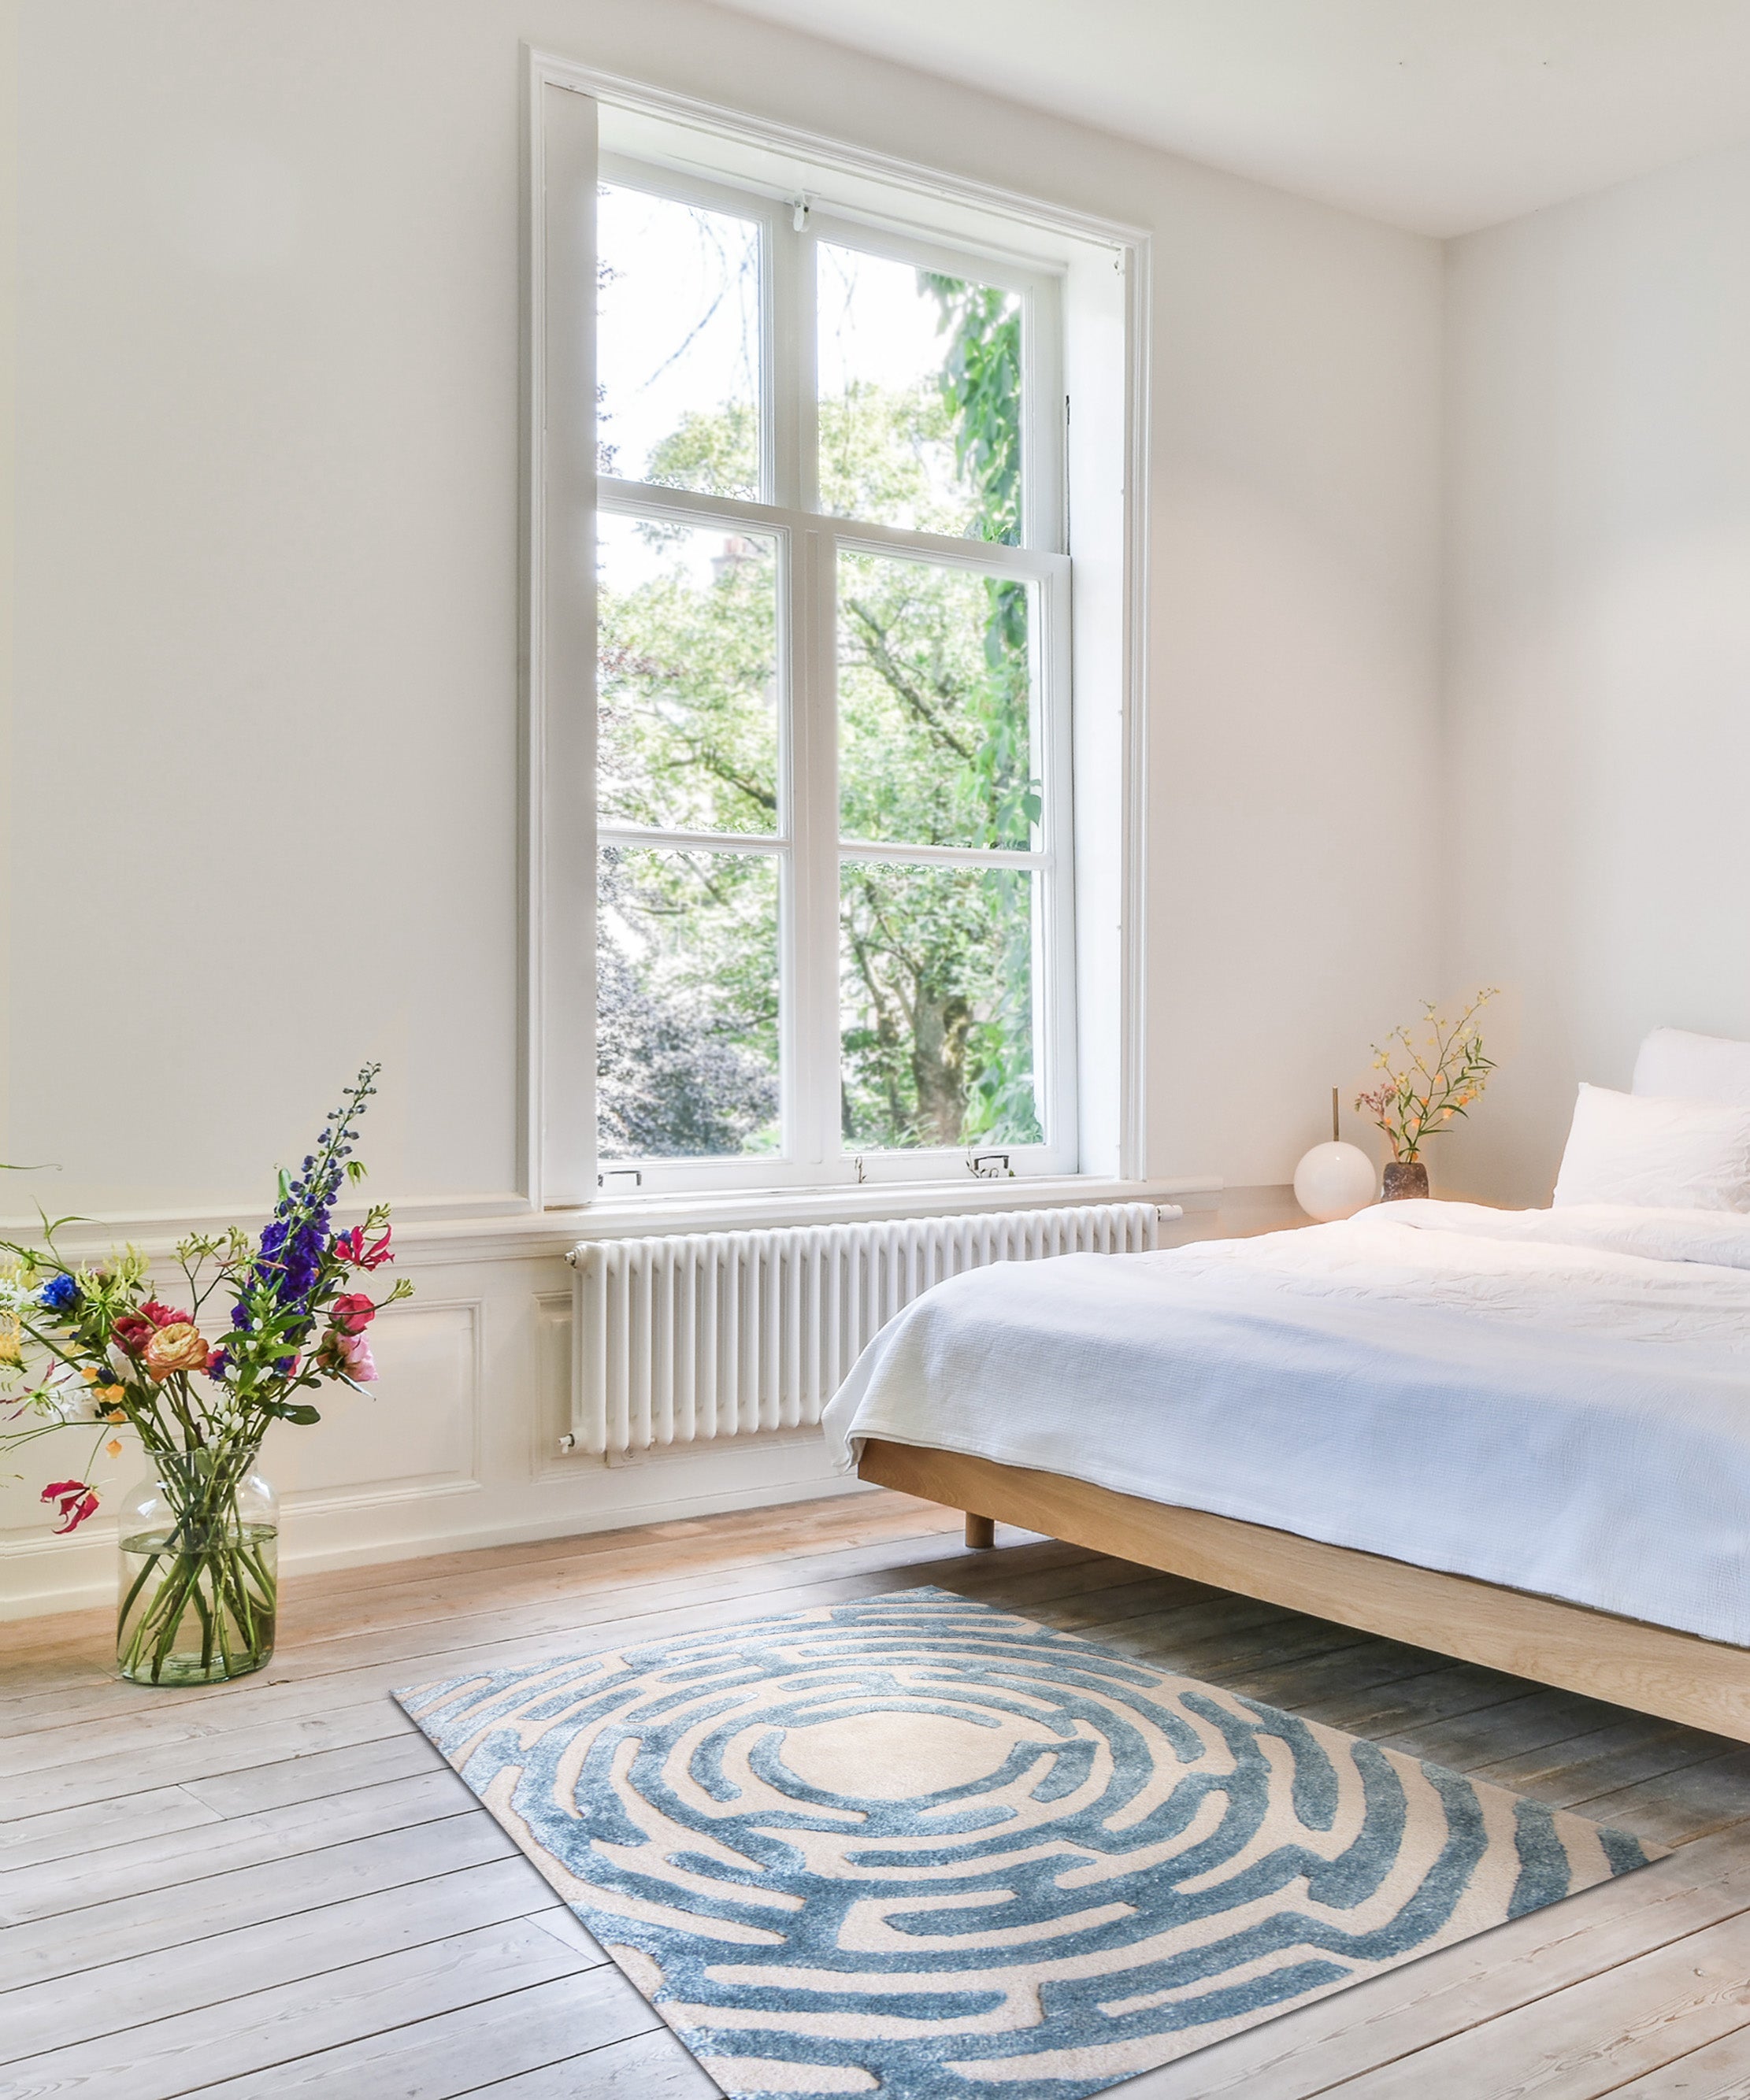 A bedroom with a sky blue Maze luxury floor rug at the end of the bed 